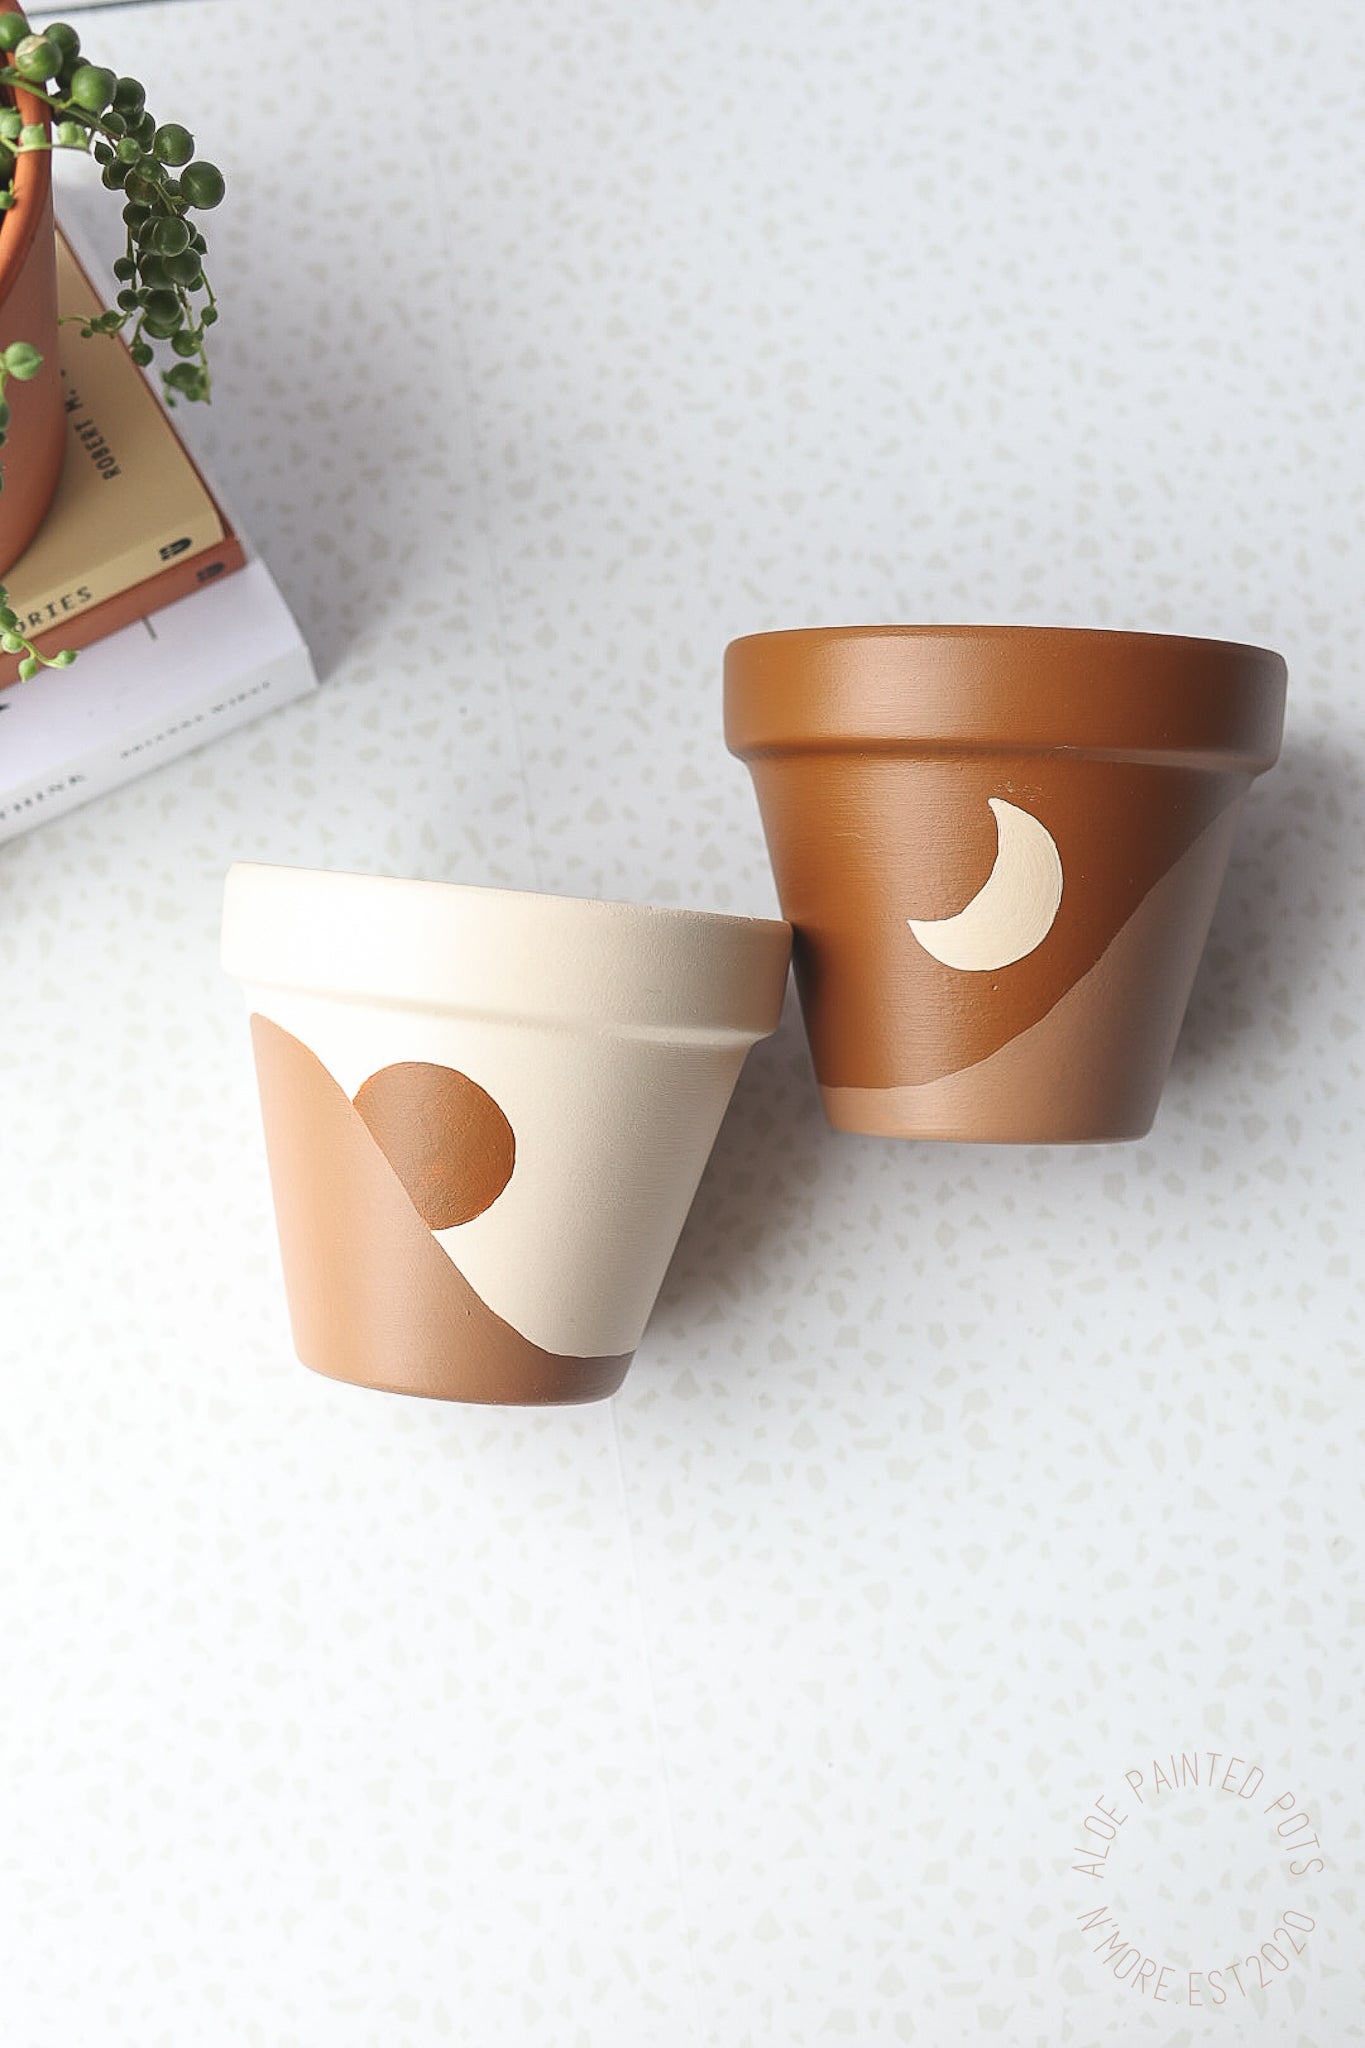 Ready to Ship | Sun and Moon Pot | Hand Painted Terracotta Pots with Drainage Hole | No Saucers